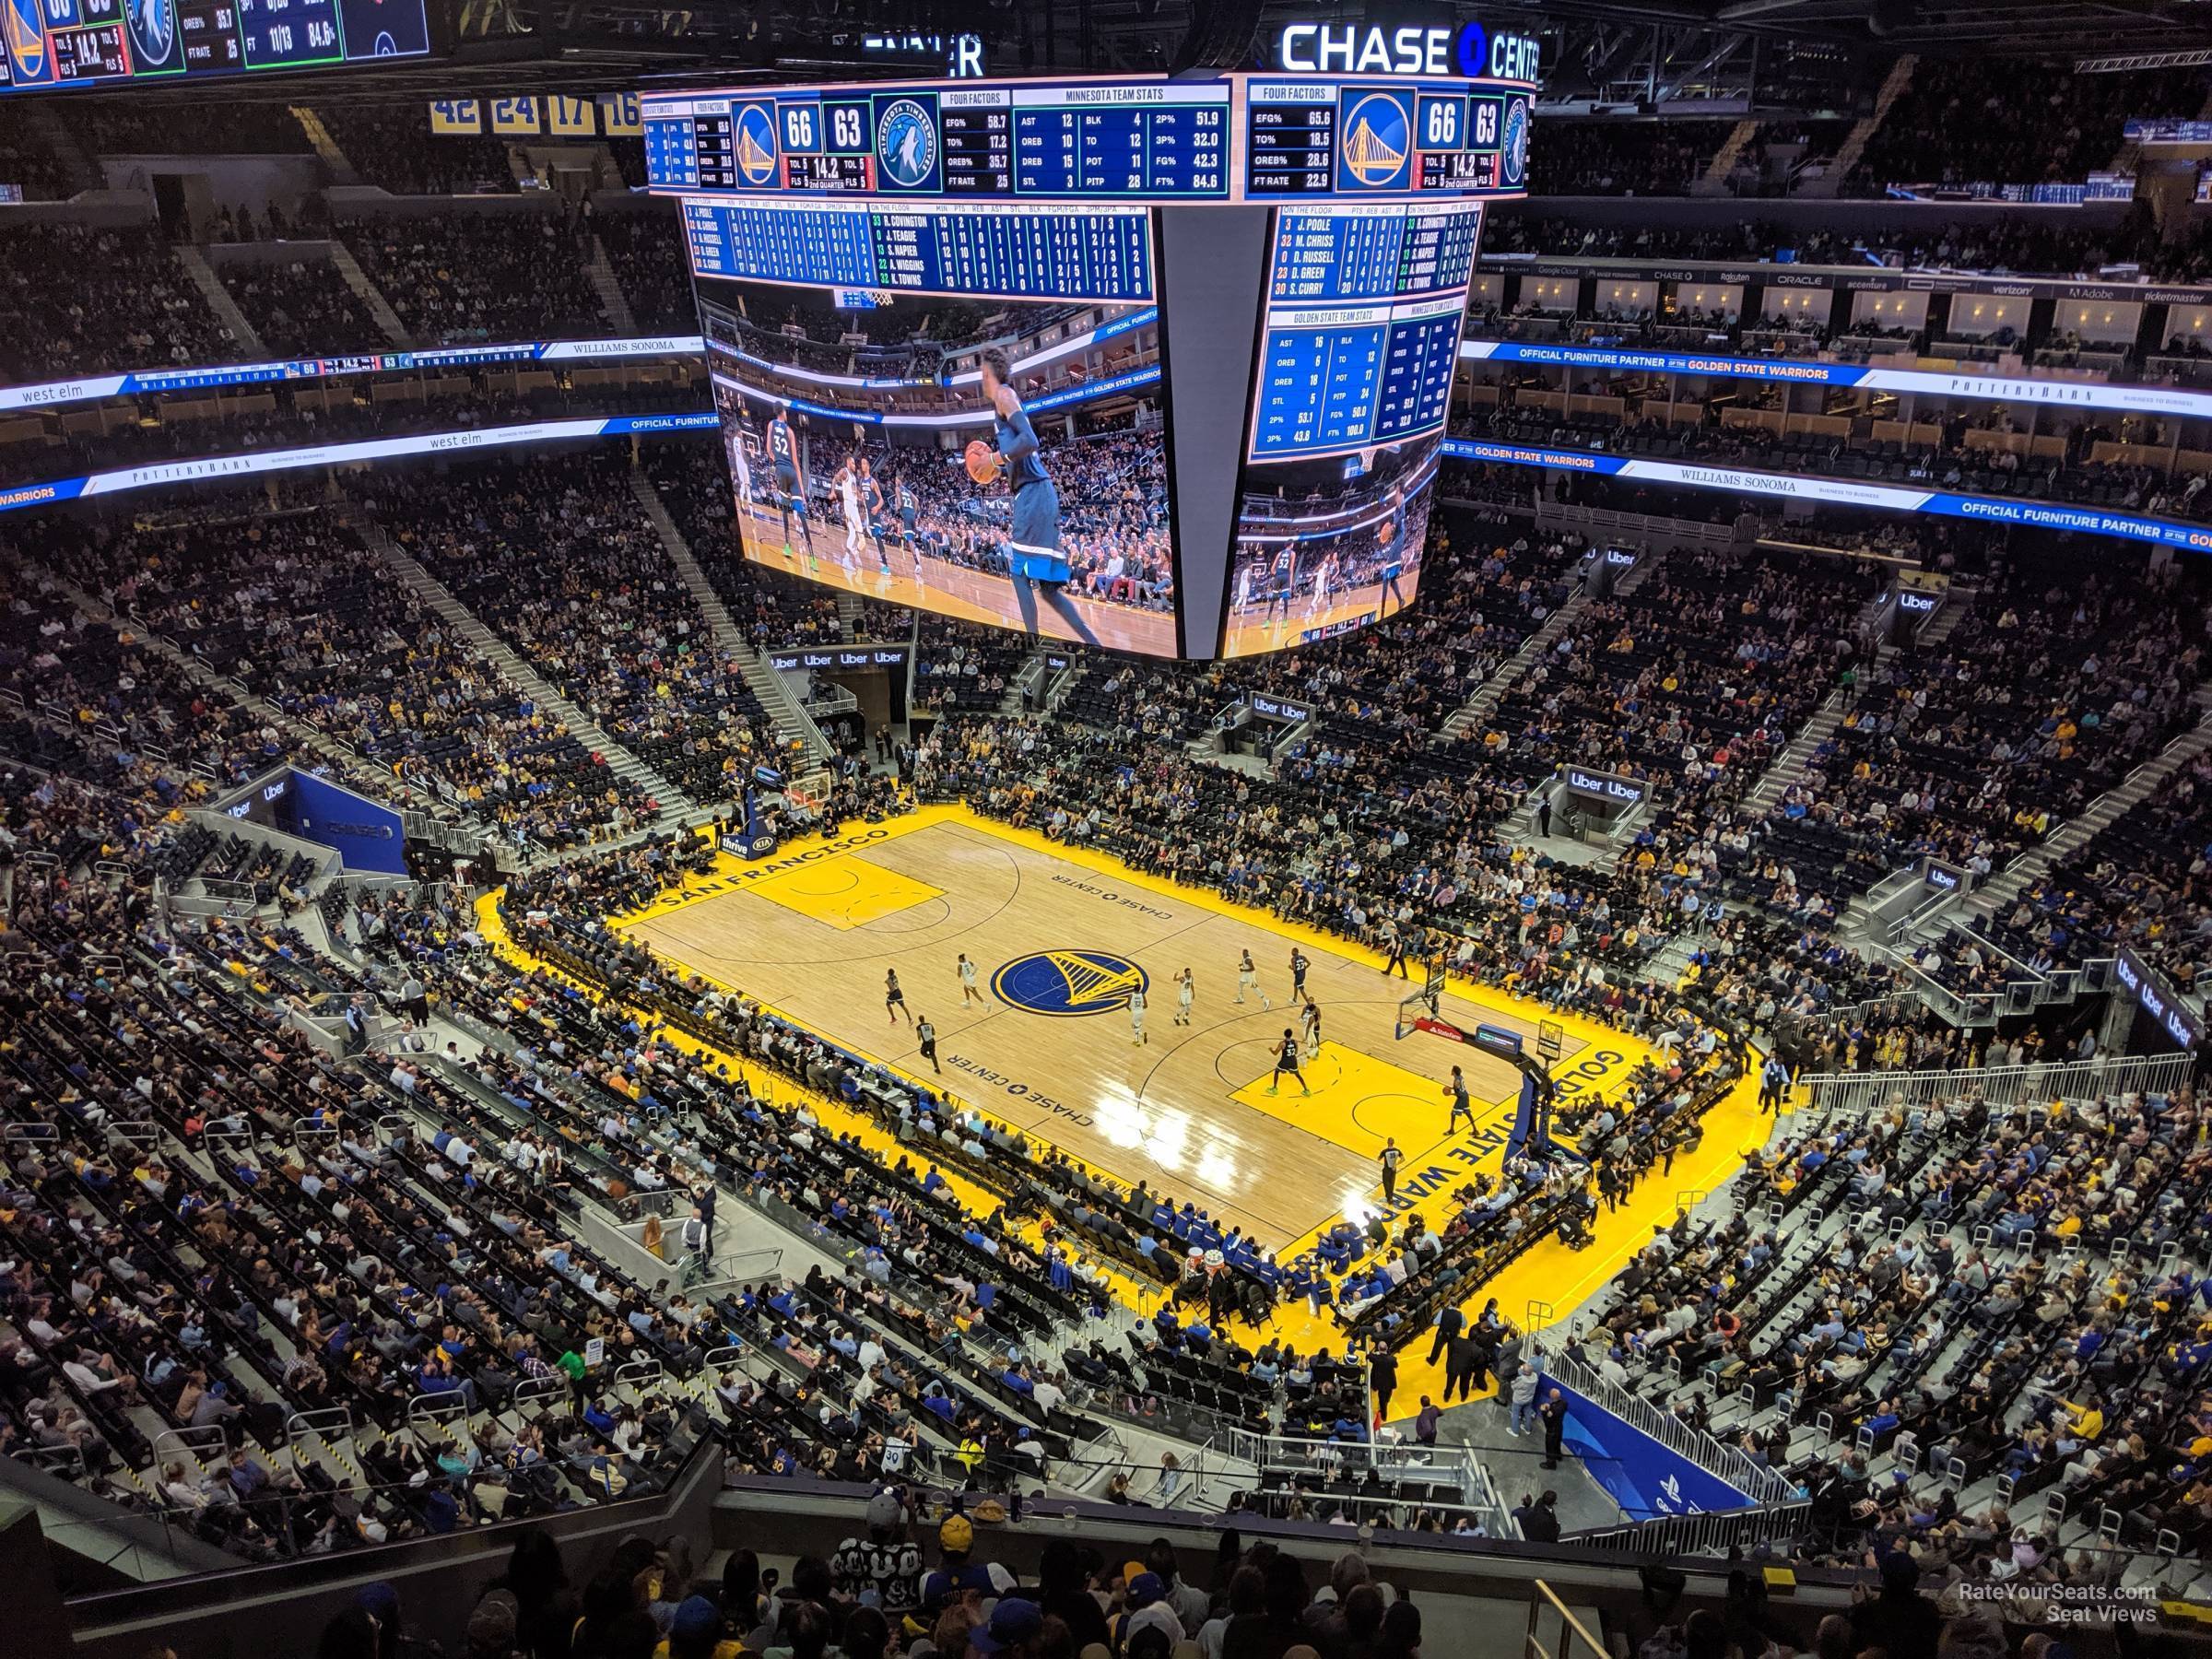 section 203, row 8 seat view  for basketball - chase center